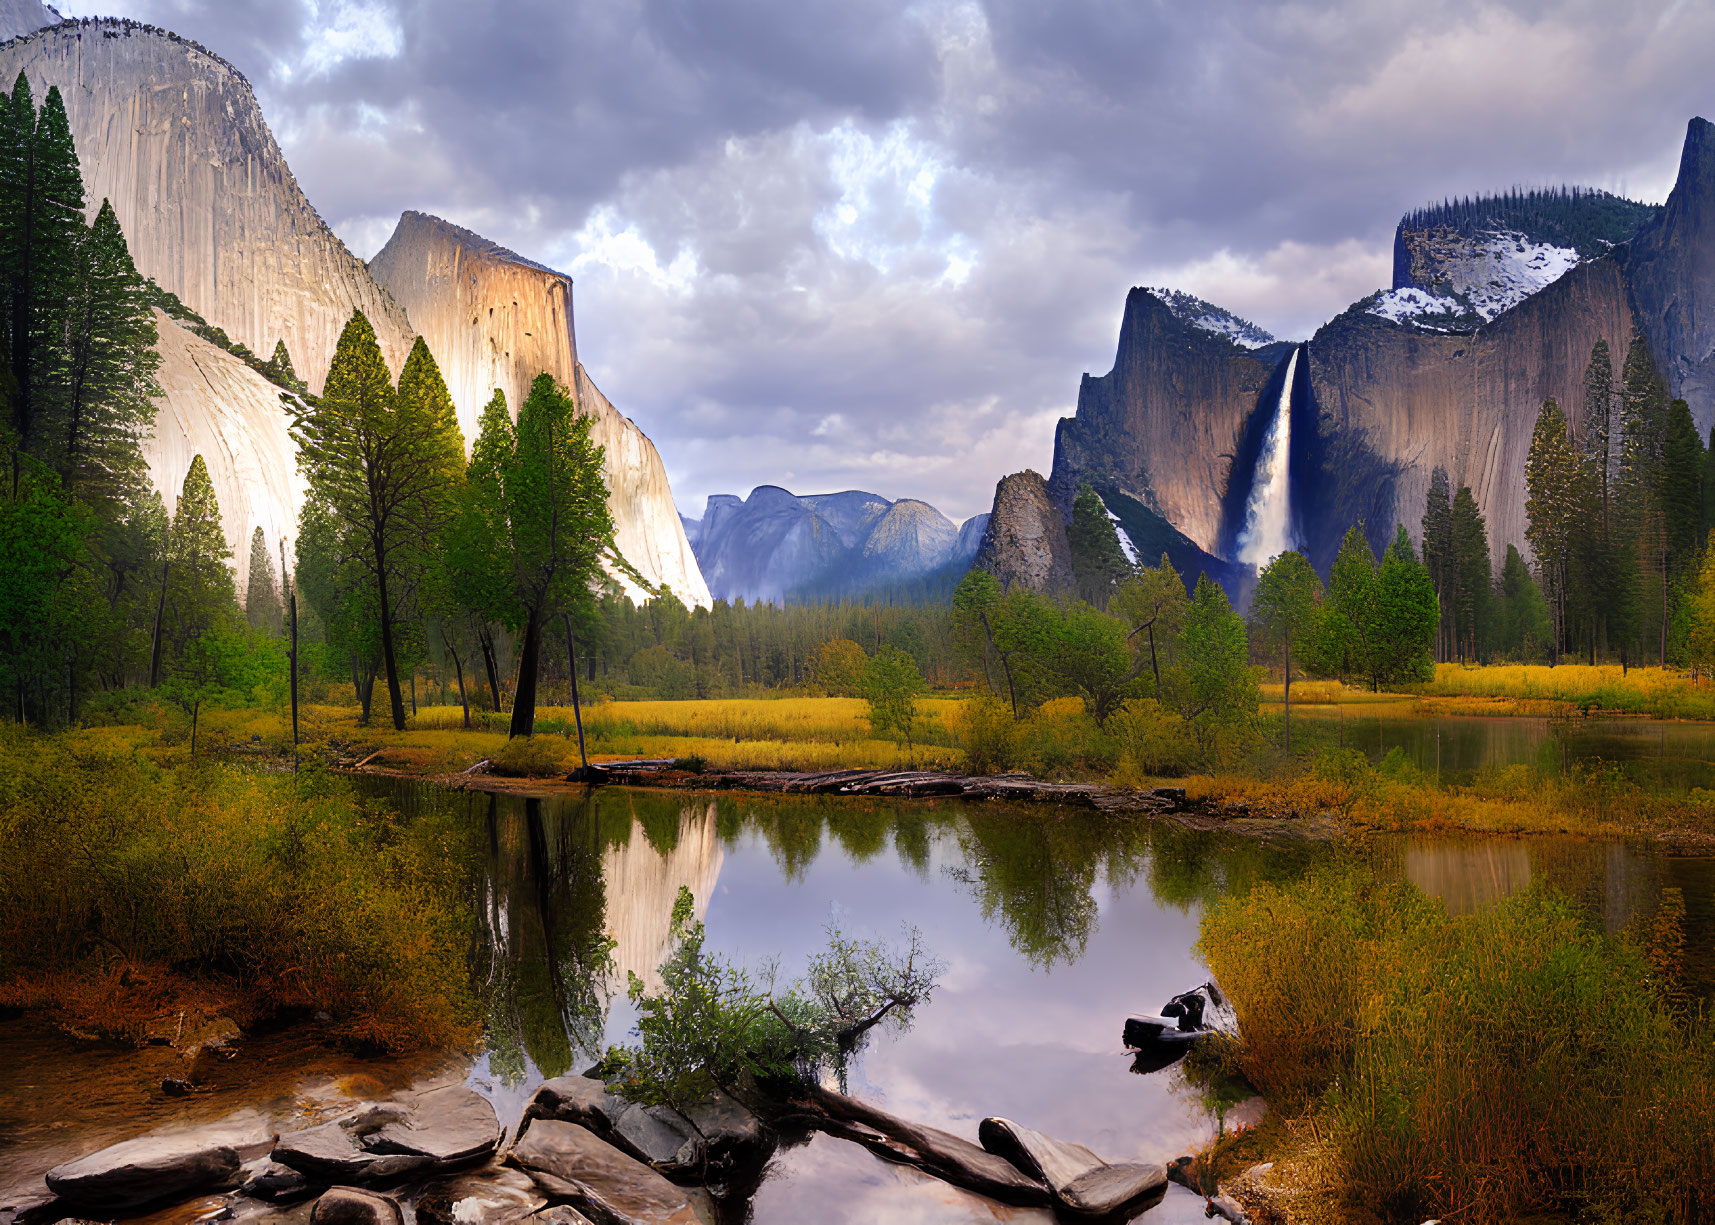 Scenic valley with reflective river, towering cliffs, forest, and cloudy sky